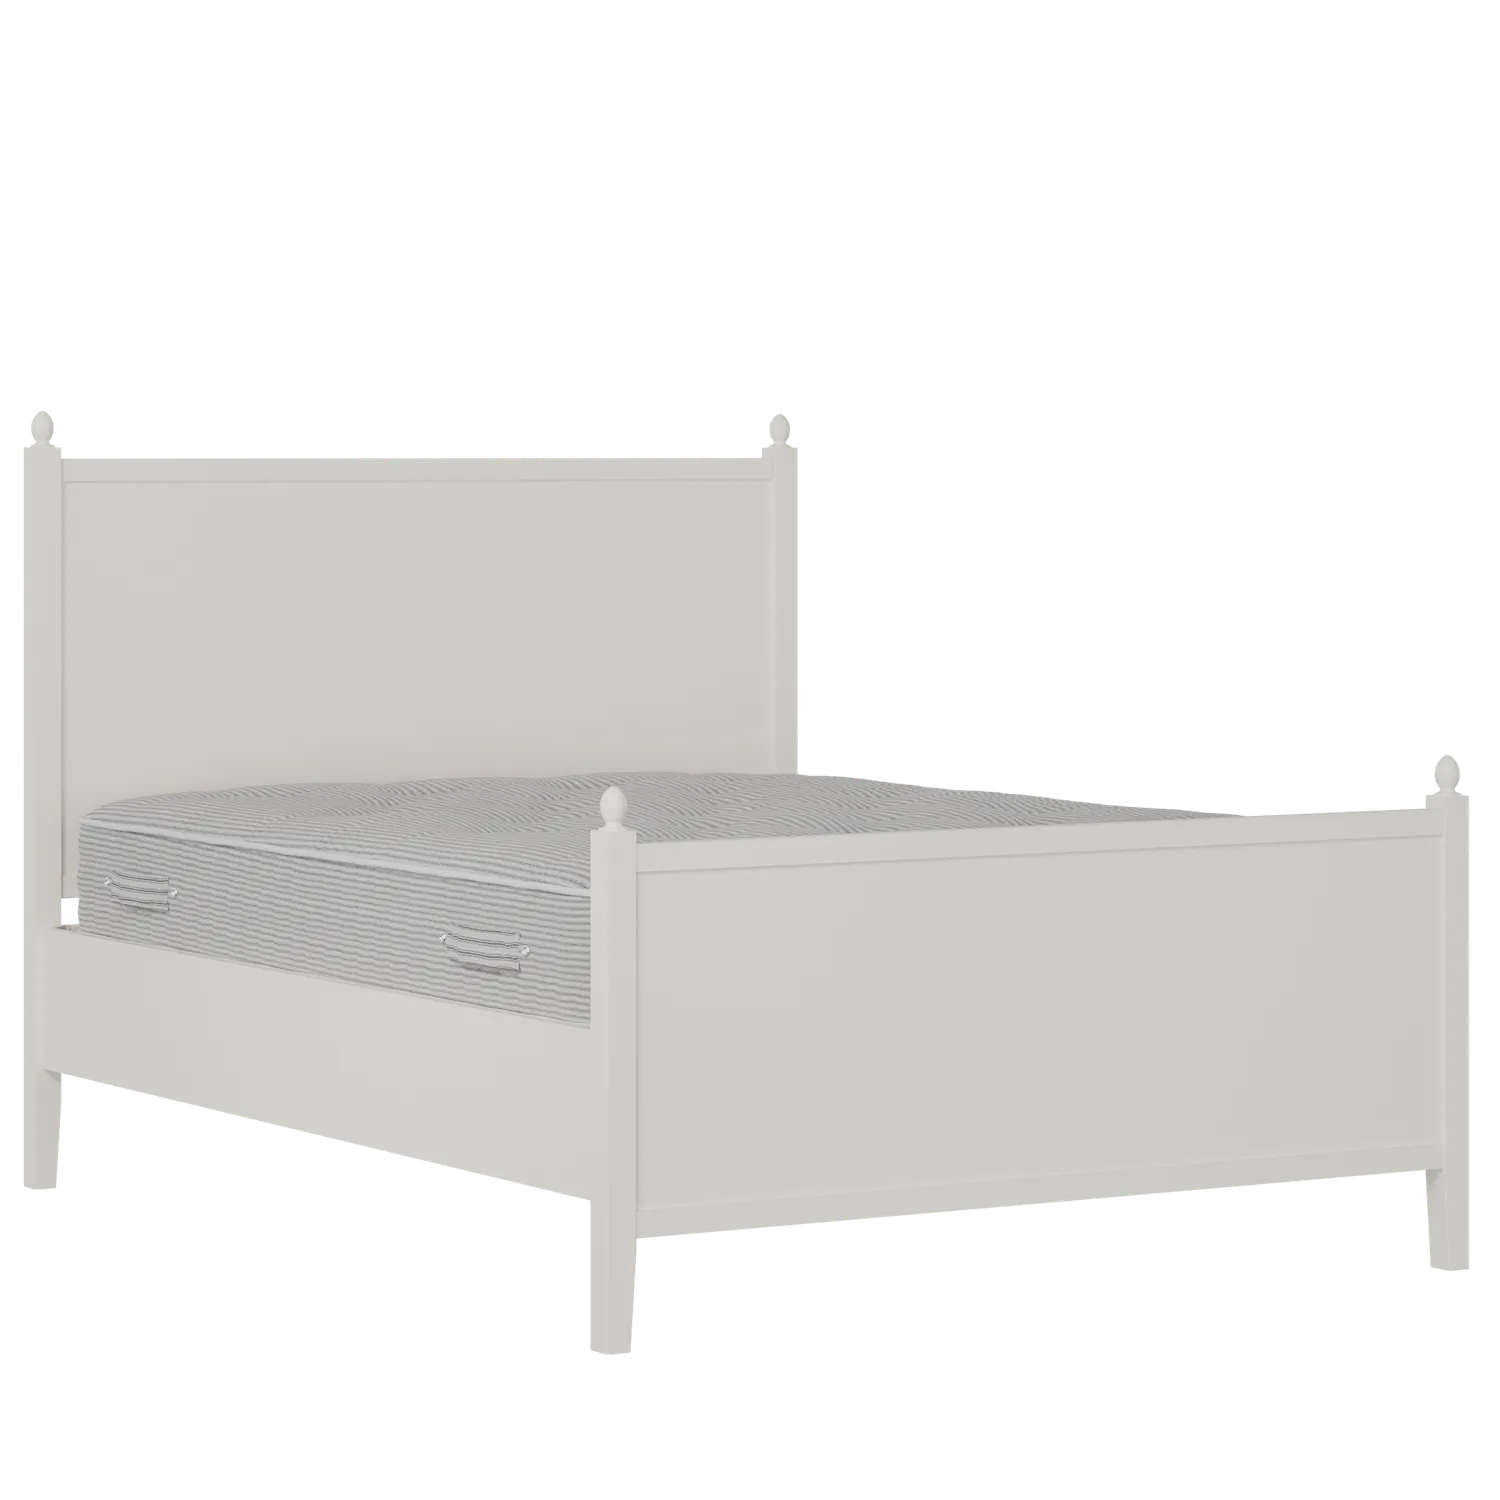 Marbella Painted painted wood bed in white with Juno mattress